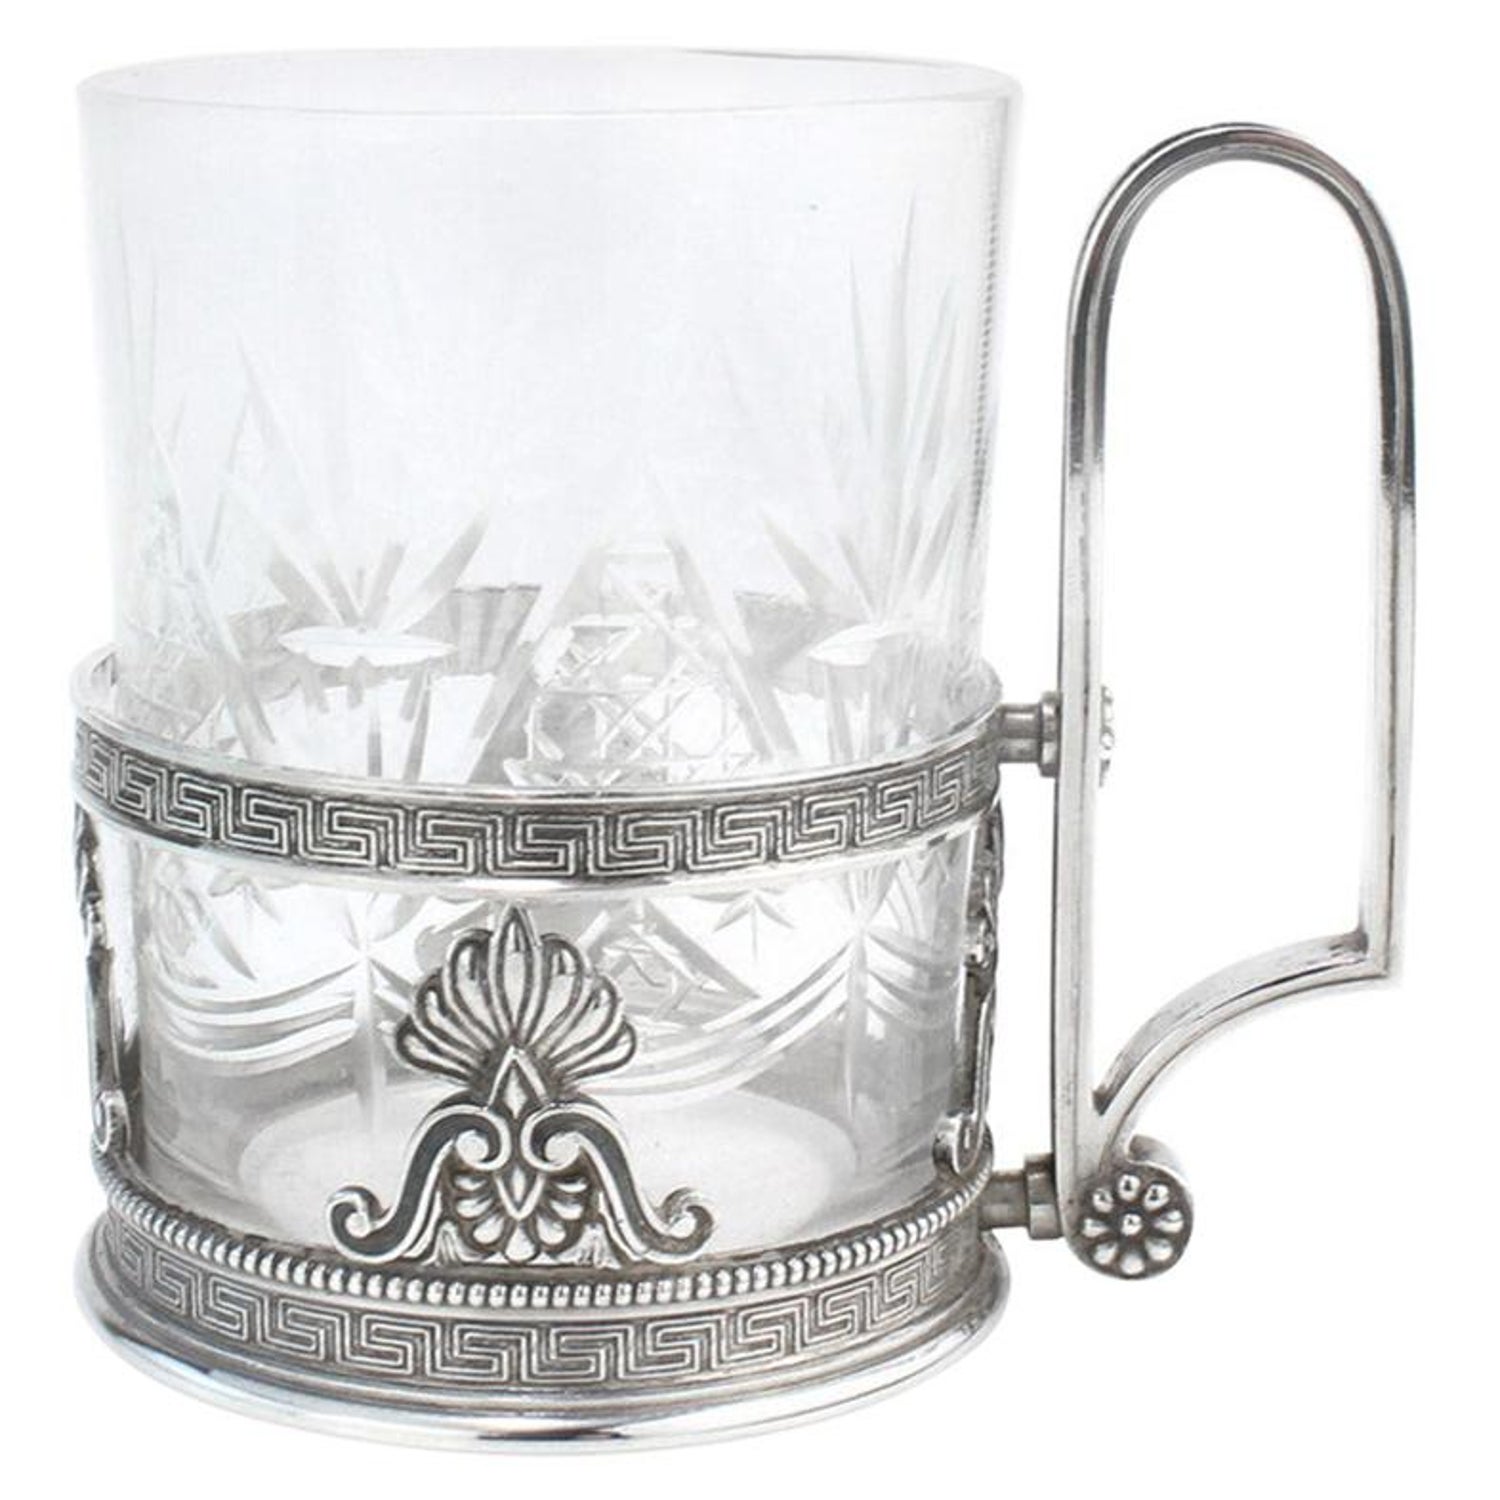 Russian Silver Plate Filigree Tea Cup Holder with Glass Insert #1